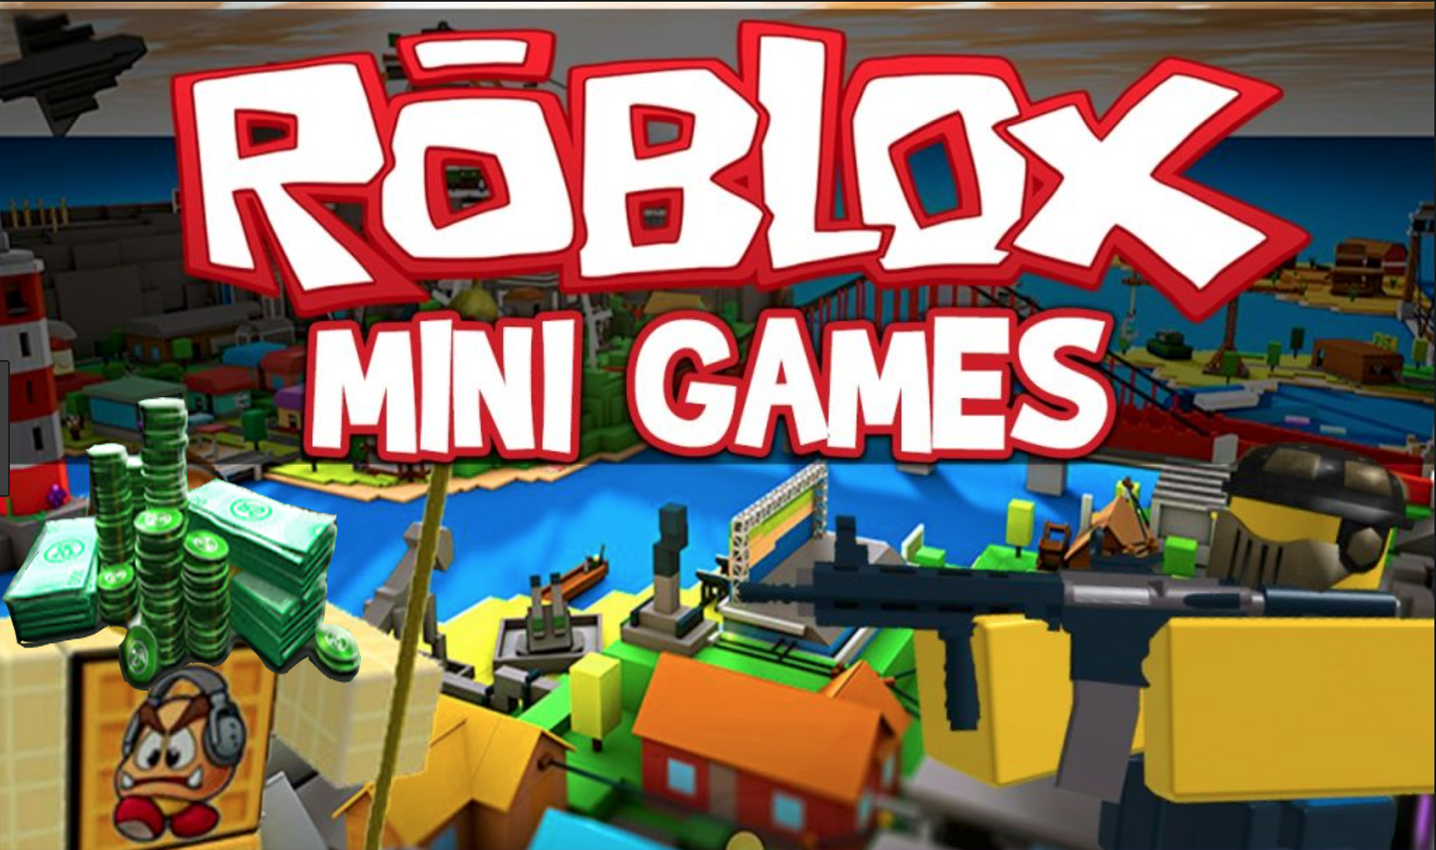 How To Get Free Robux For Roblox 2018 1.0 APK Download - Android ... - 